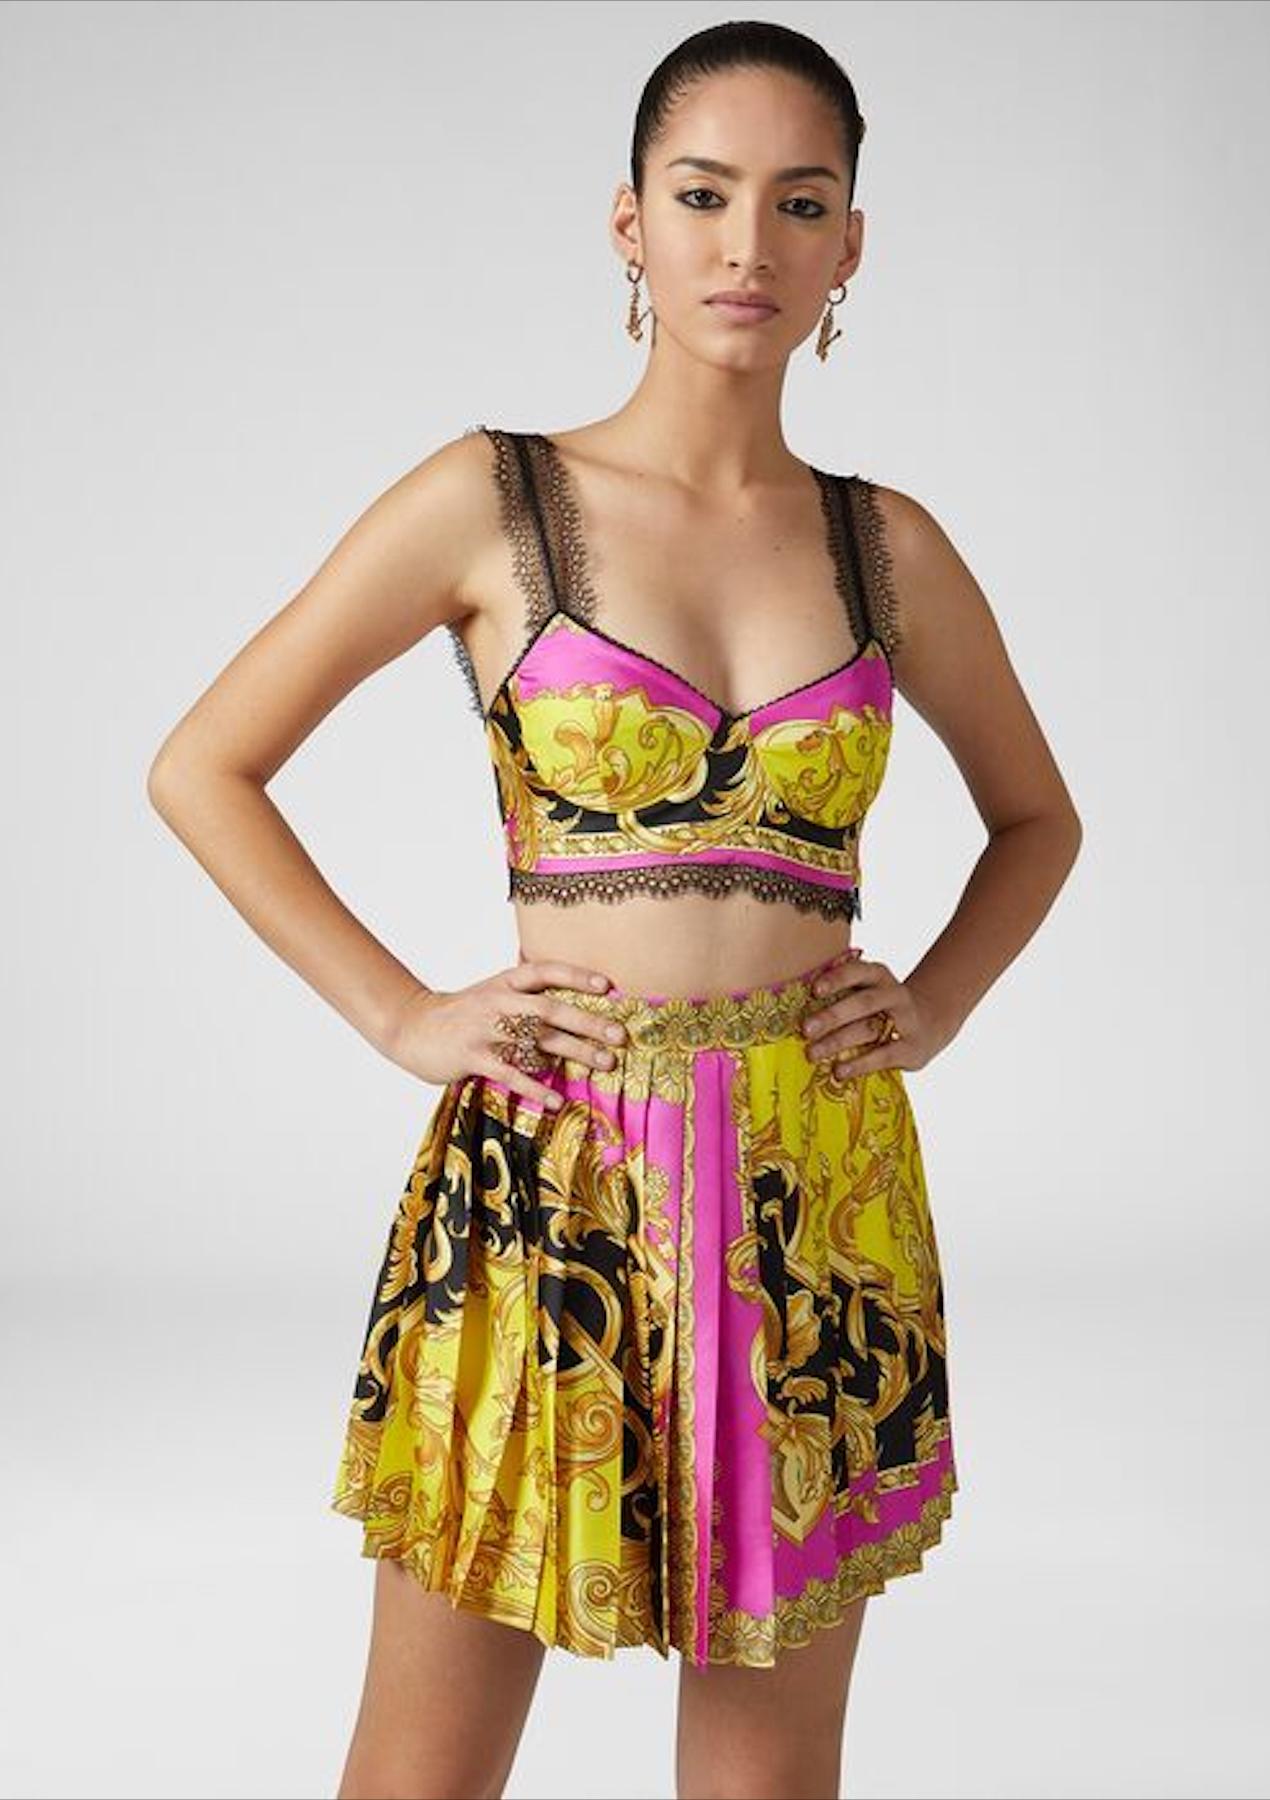 Versace Fuchsia Barocco Femme Print Lace Bralette / Bustier Top 

Since 1978, Gianni Versaces iconic Italian label has been celebrated for its over-the-top glamour and sexiness. After Gianni's tragic death in 1997, his sister Donatella took the